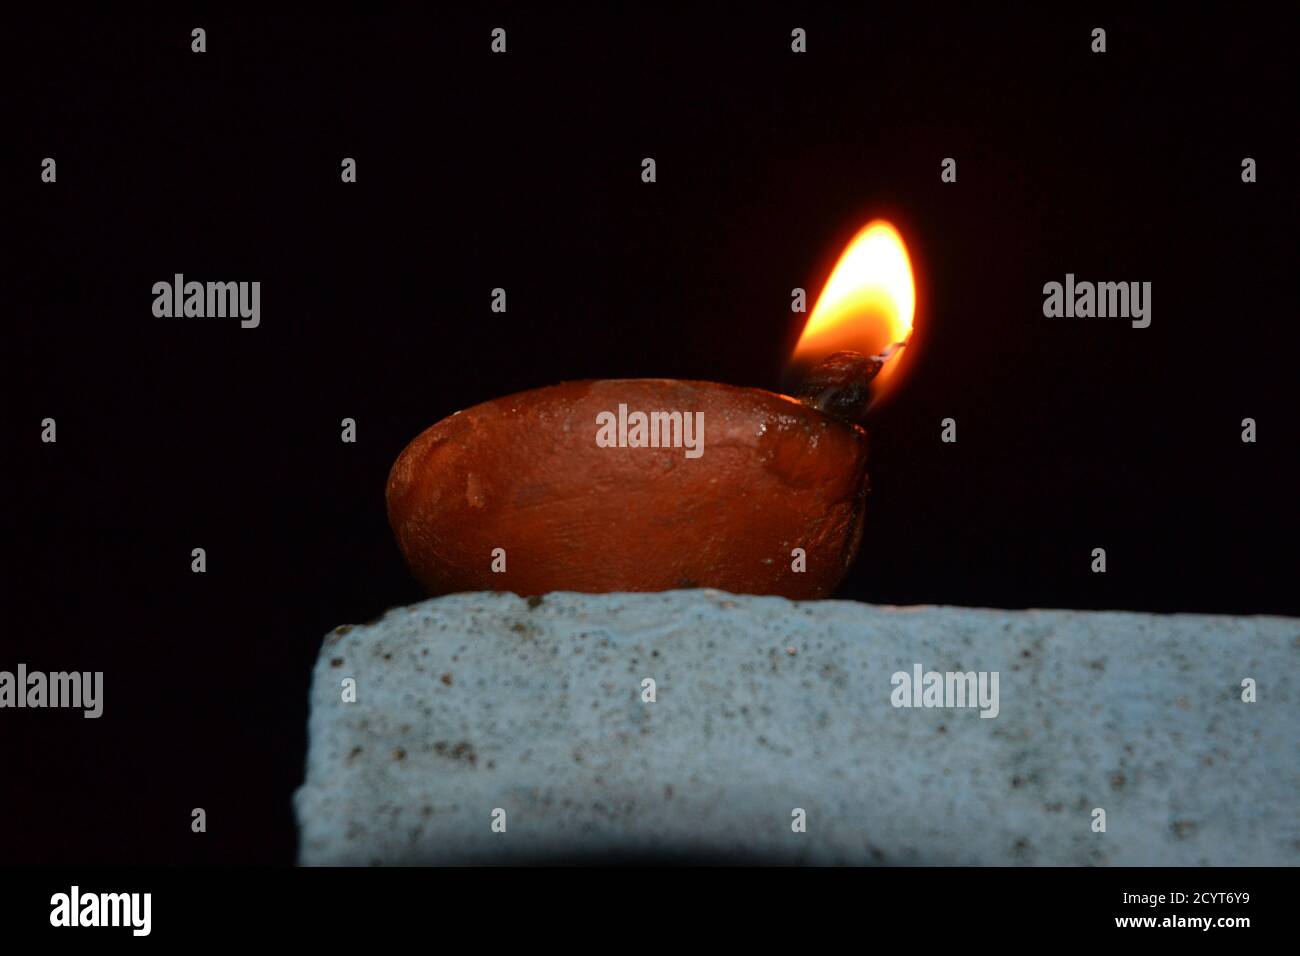 Oil lamps with flame. deepawali or diwali is celebrated by hindus by lighting the oil lamps. Stock Photo